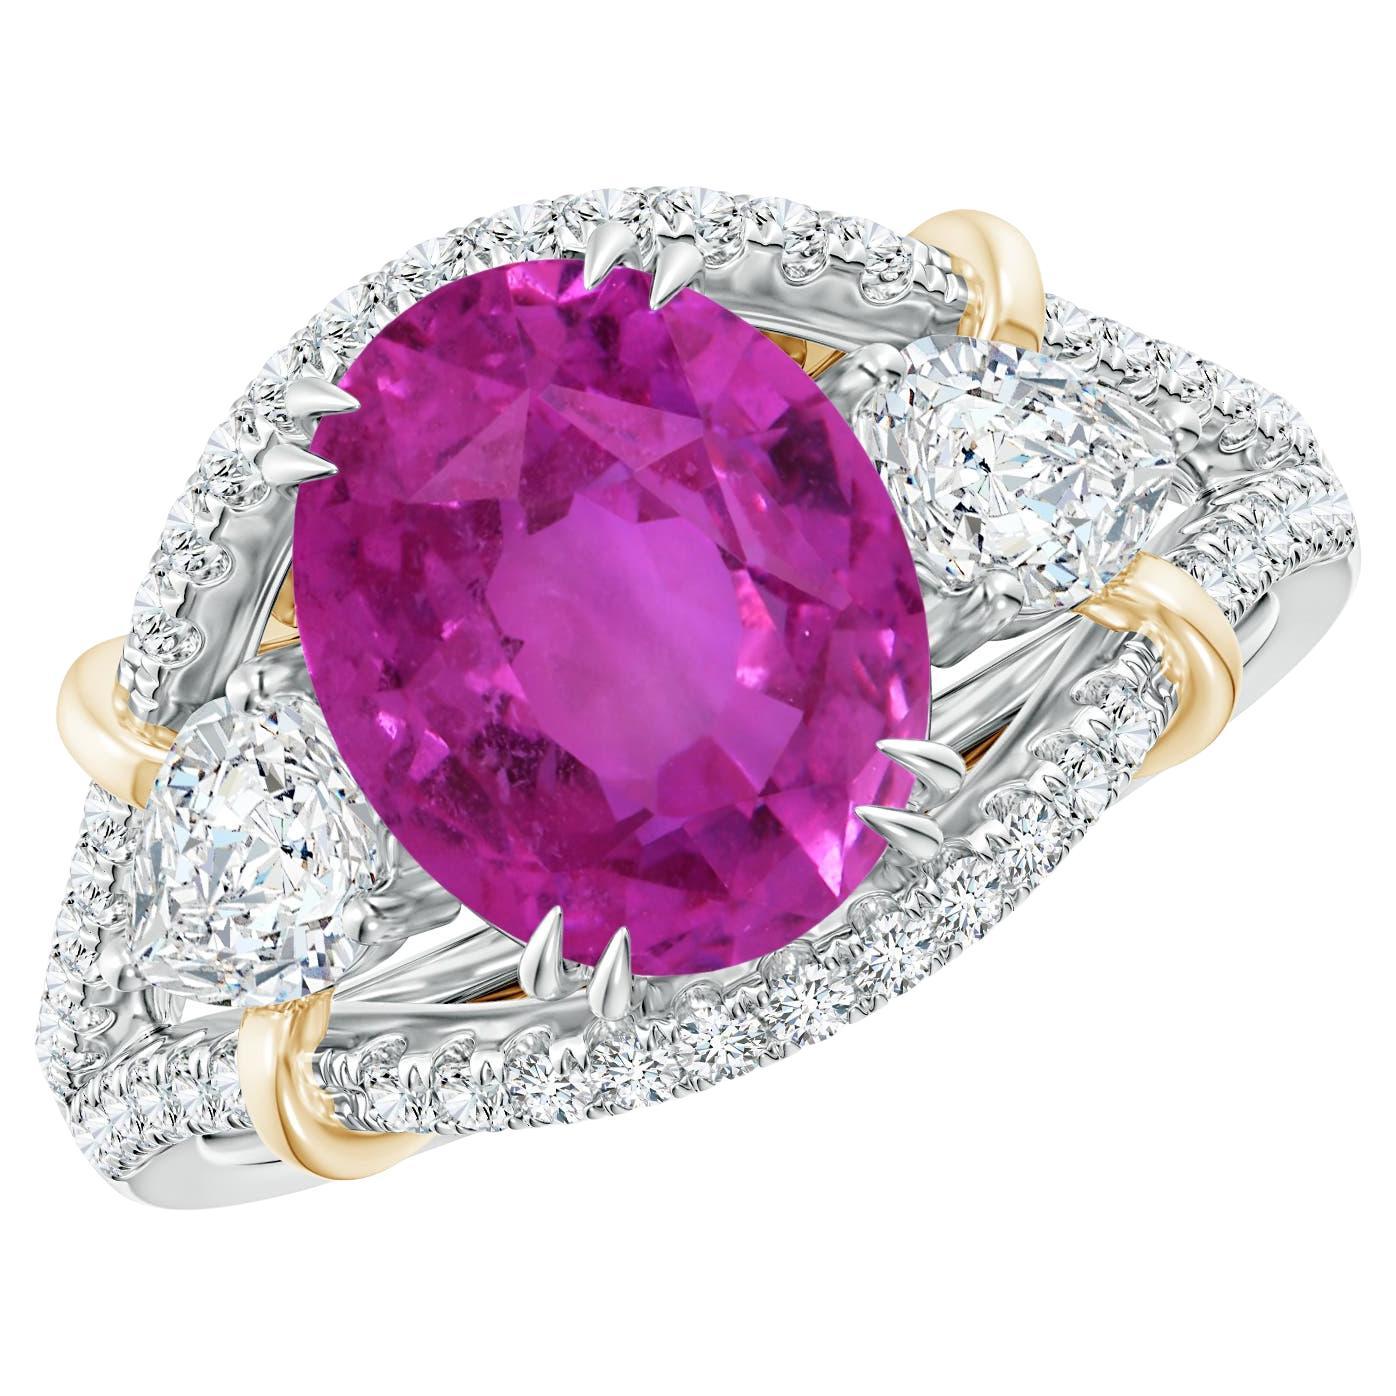 For Sale:  Angara GIA Certified Natural Pink Sapphire Ring in Yellow Gold with Diamonds